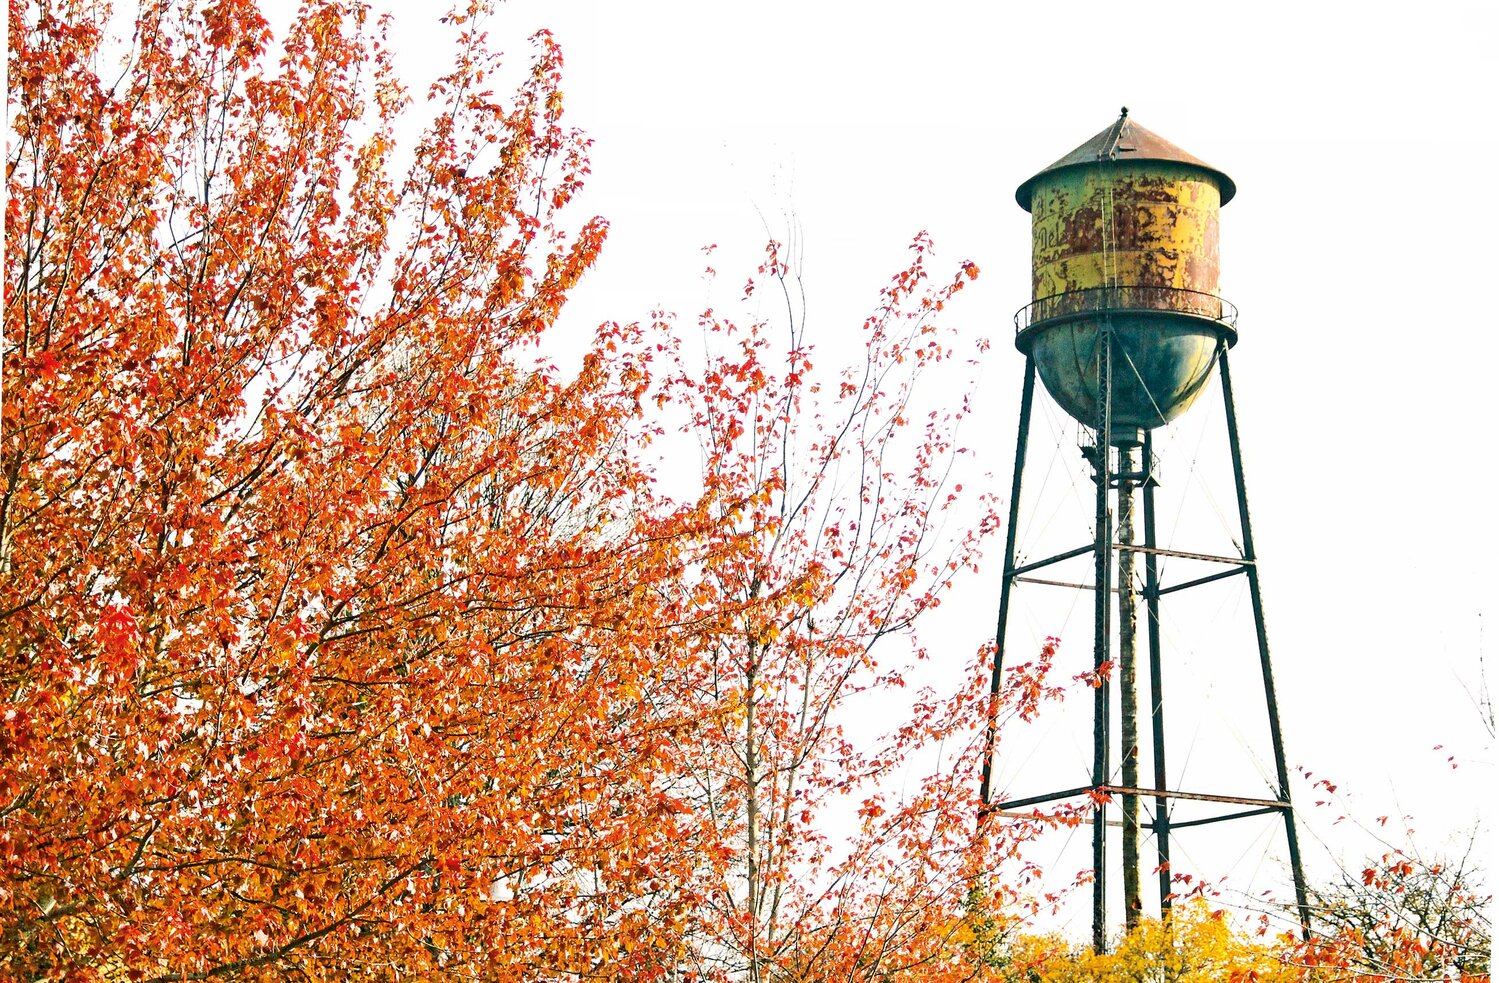 Fall foliage has decorated areas of Blaine, including near the old Semiahmoo water tower, during a vibrant autumn this year.